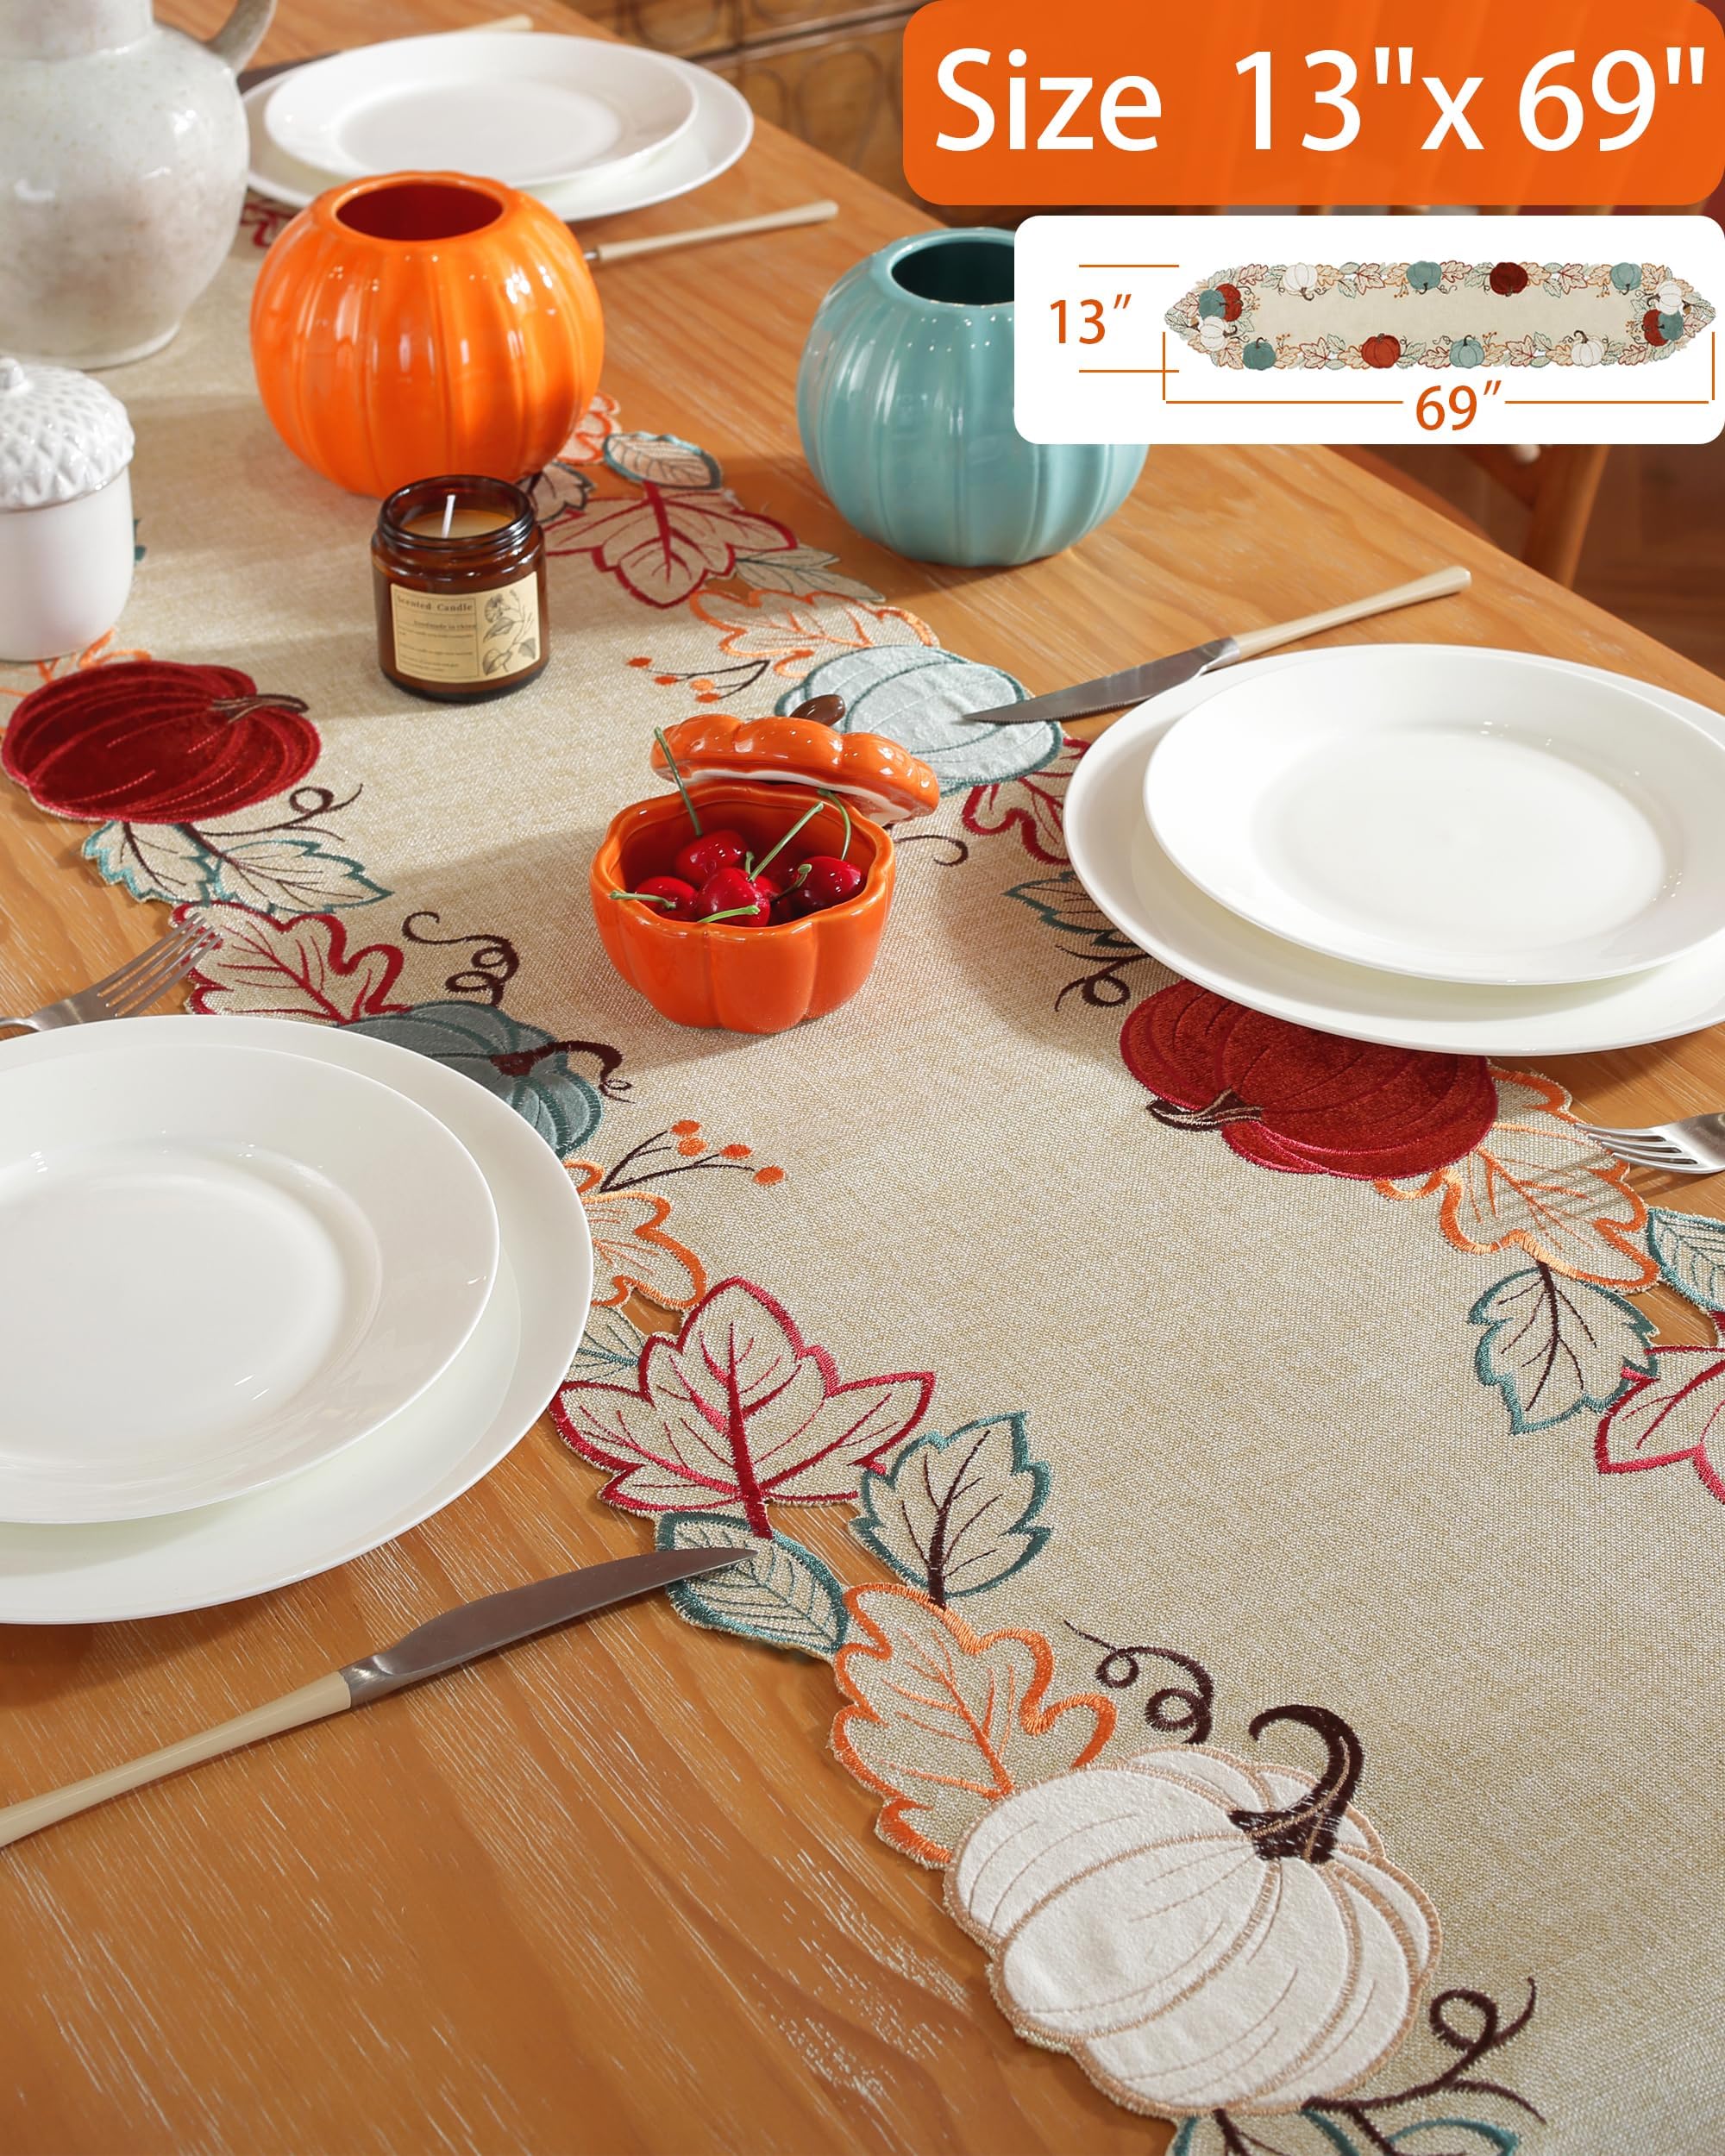 Thanksgiving Table Runner Fall Decorations for Home Fall Table Runner with Embroidered Velvet Pumpkins Maple Leaf. Halloween/ Christmas Table Decorations for Kitchen Dining Harvest Party Decor